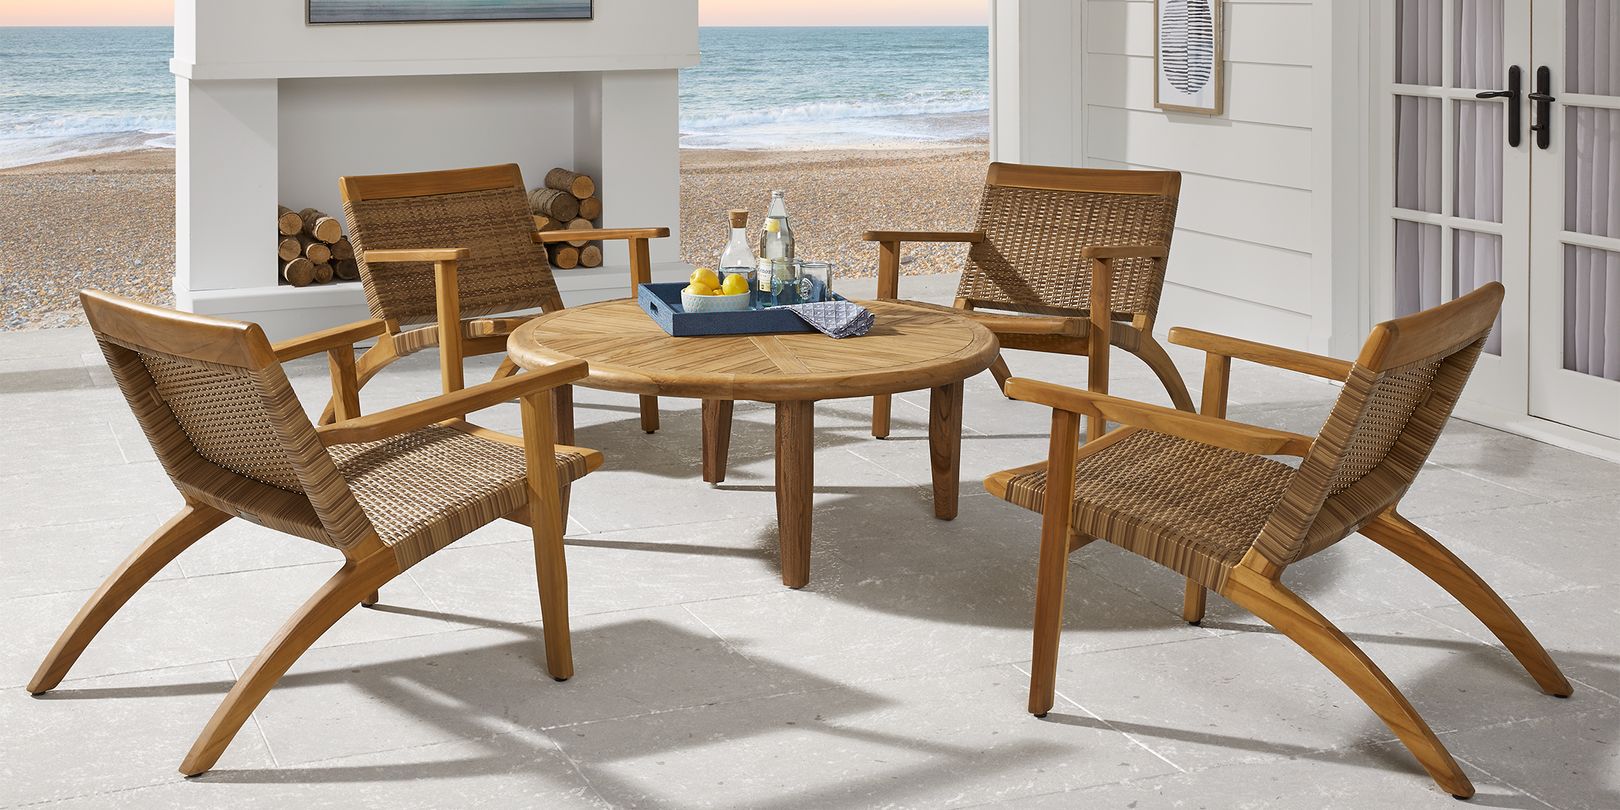 Photo of outdoor wooden seating set with wicker seats and table